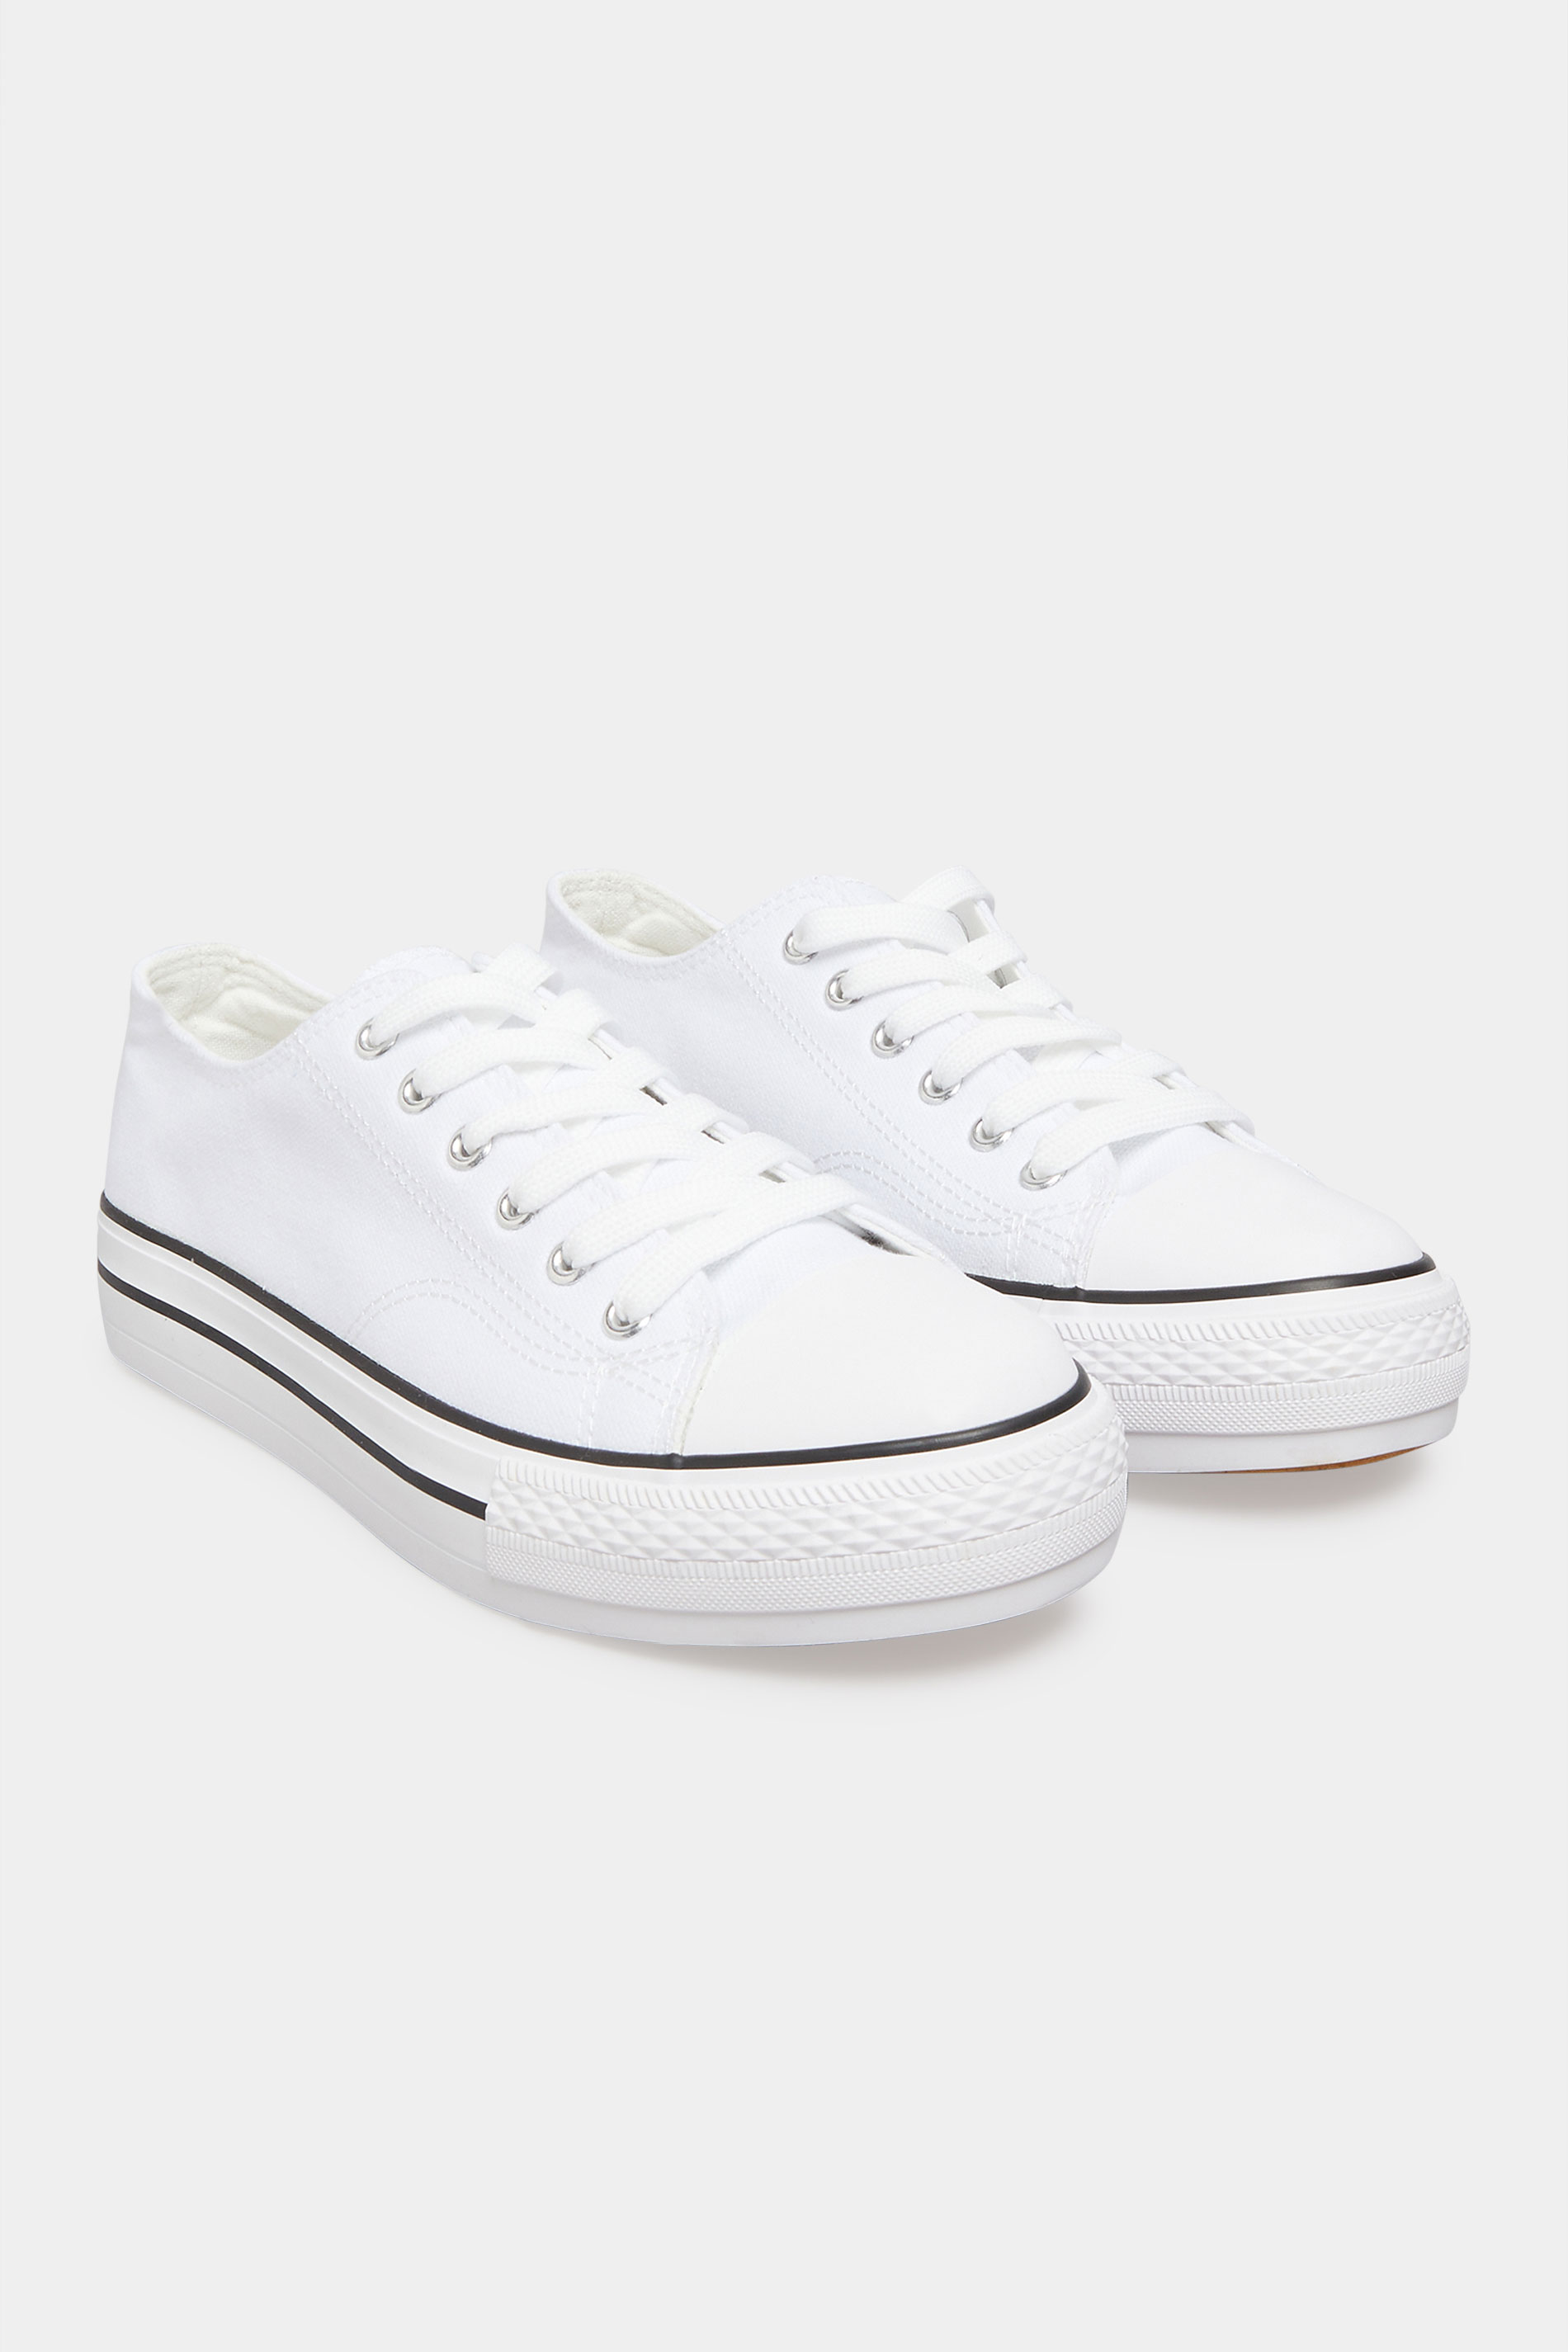 LTS White Platform Canvas Trainers In Standard Fit | Long Tall Sally